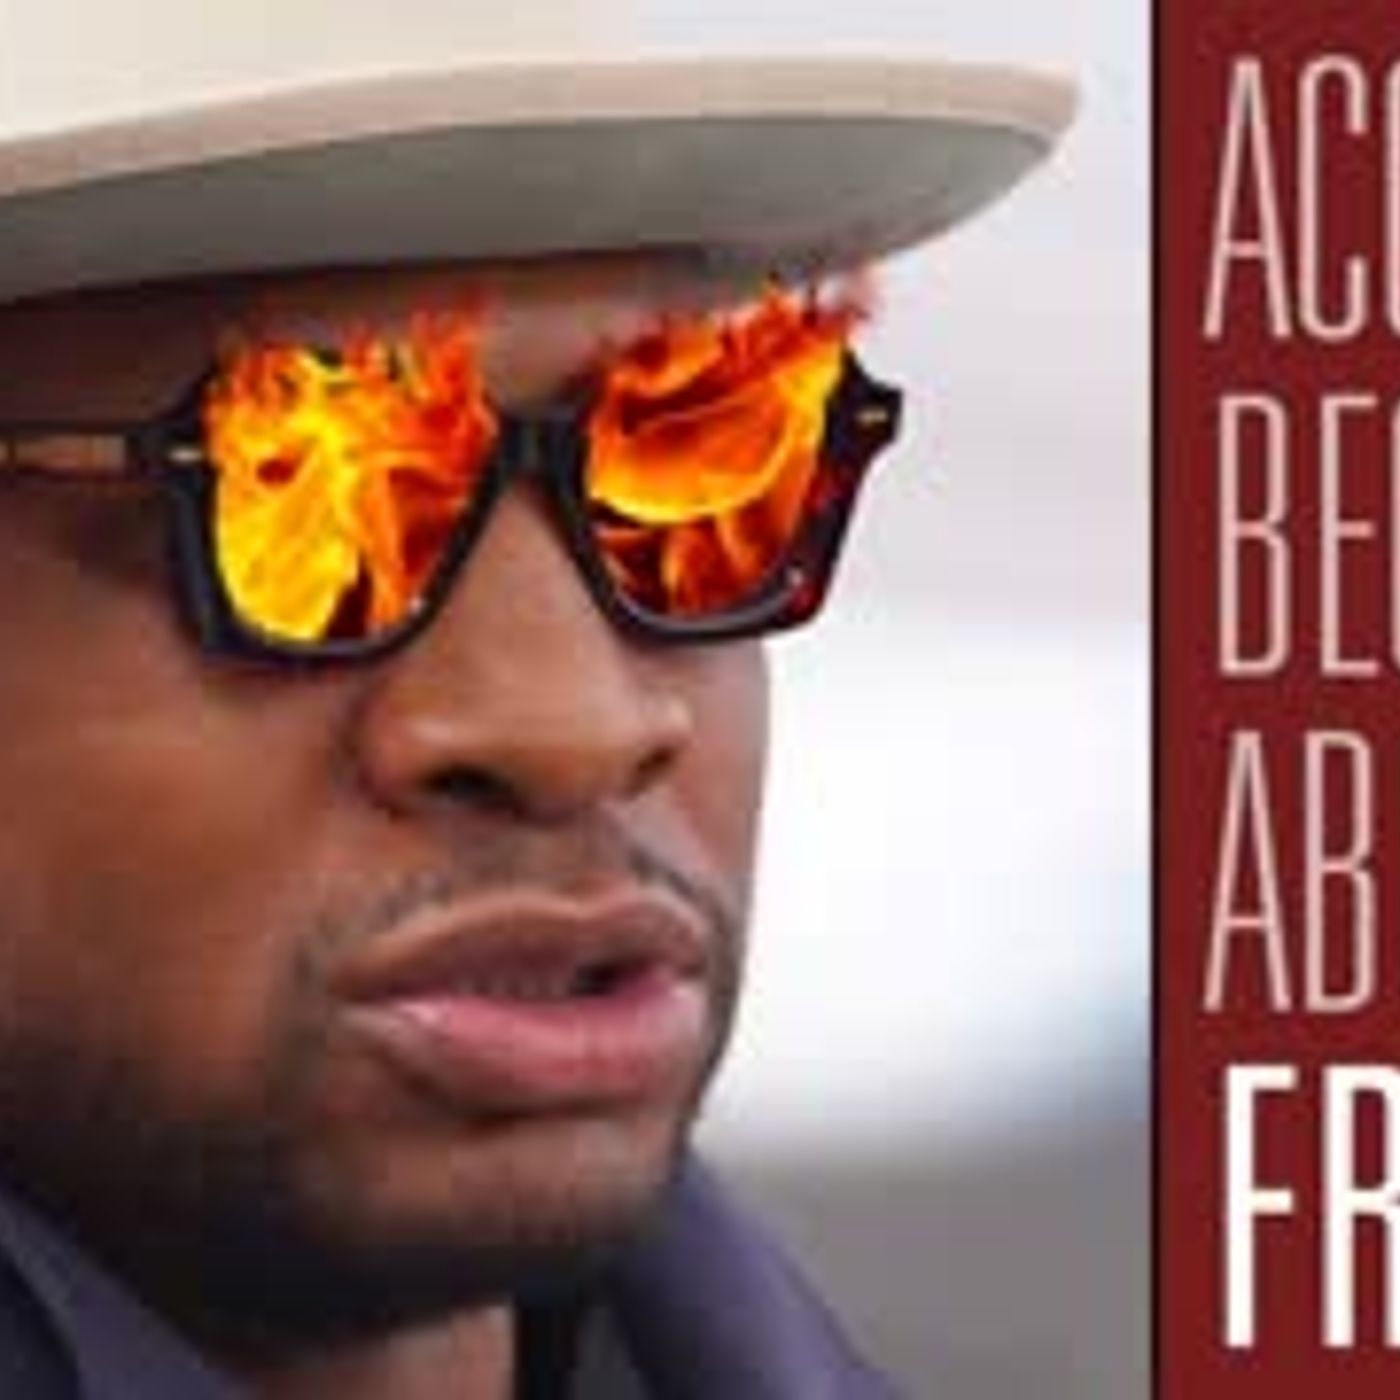 When the Accuser Becomes the Abuser! Actor Jonathan Majors' Accuser Arrest? | Maintaining Frame 76